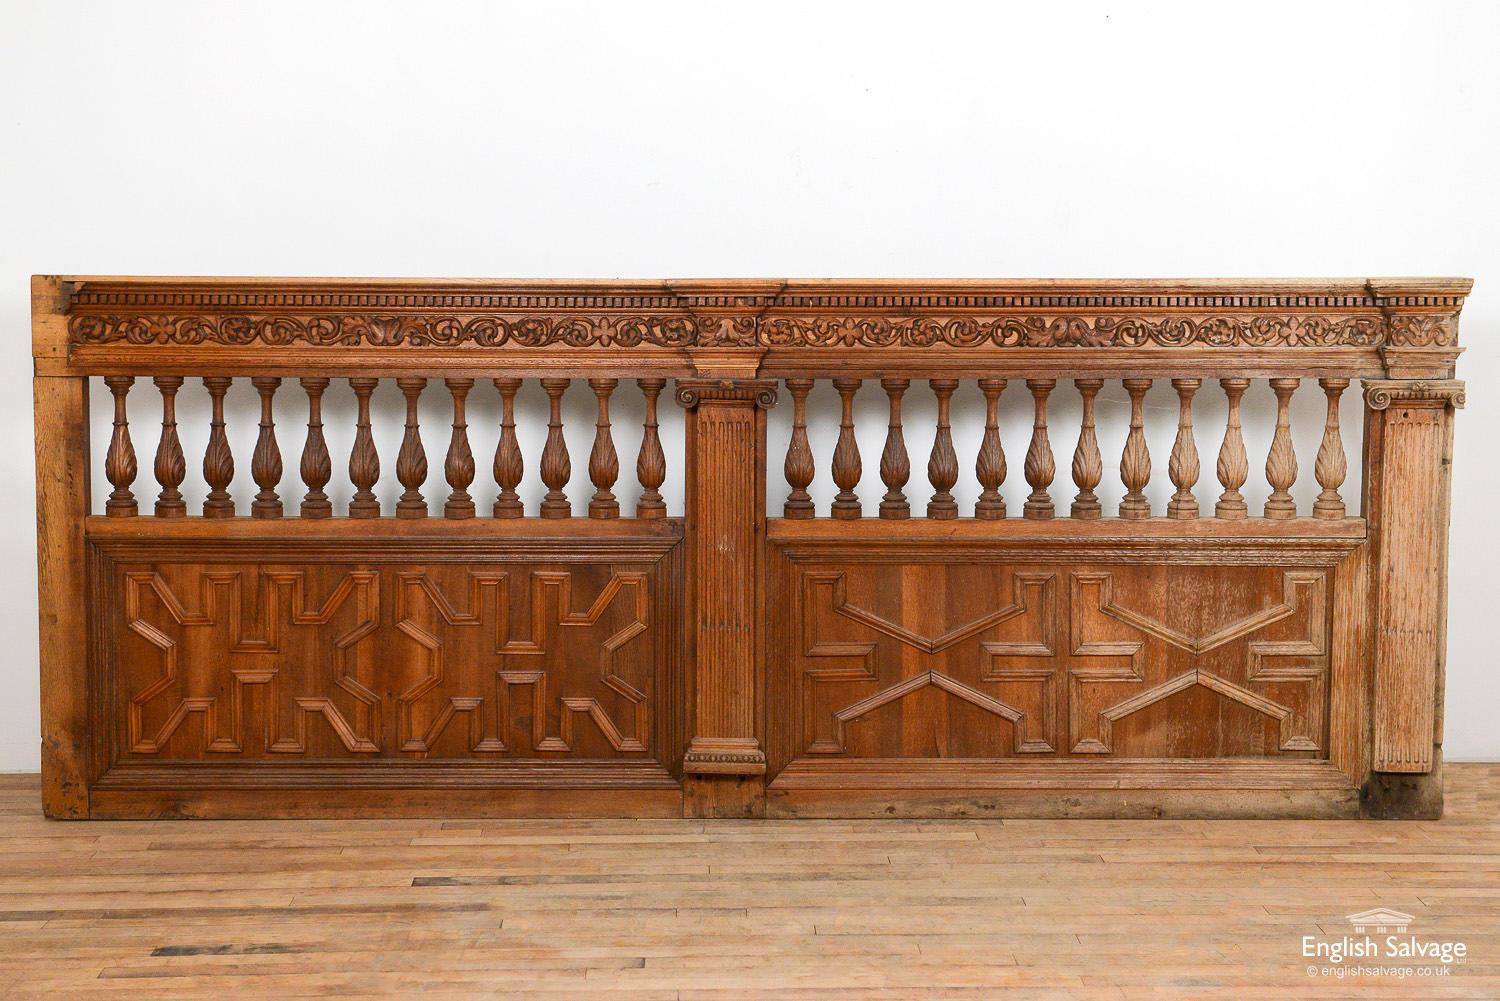 Reclaimed 19th century oak panelling / gallery with integral balustrading. Detail includes a corniced top shelf with dentil layer beneath and carved acanthus leaves layer beneath that. Decorative Ionic style fluted pillars. Fielded decorative panels